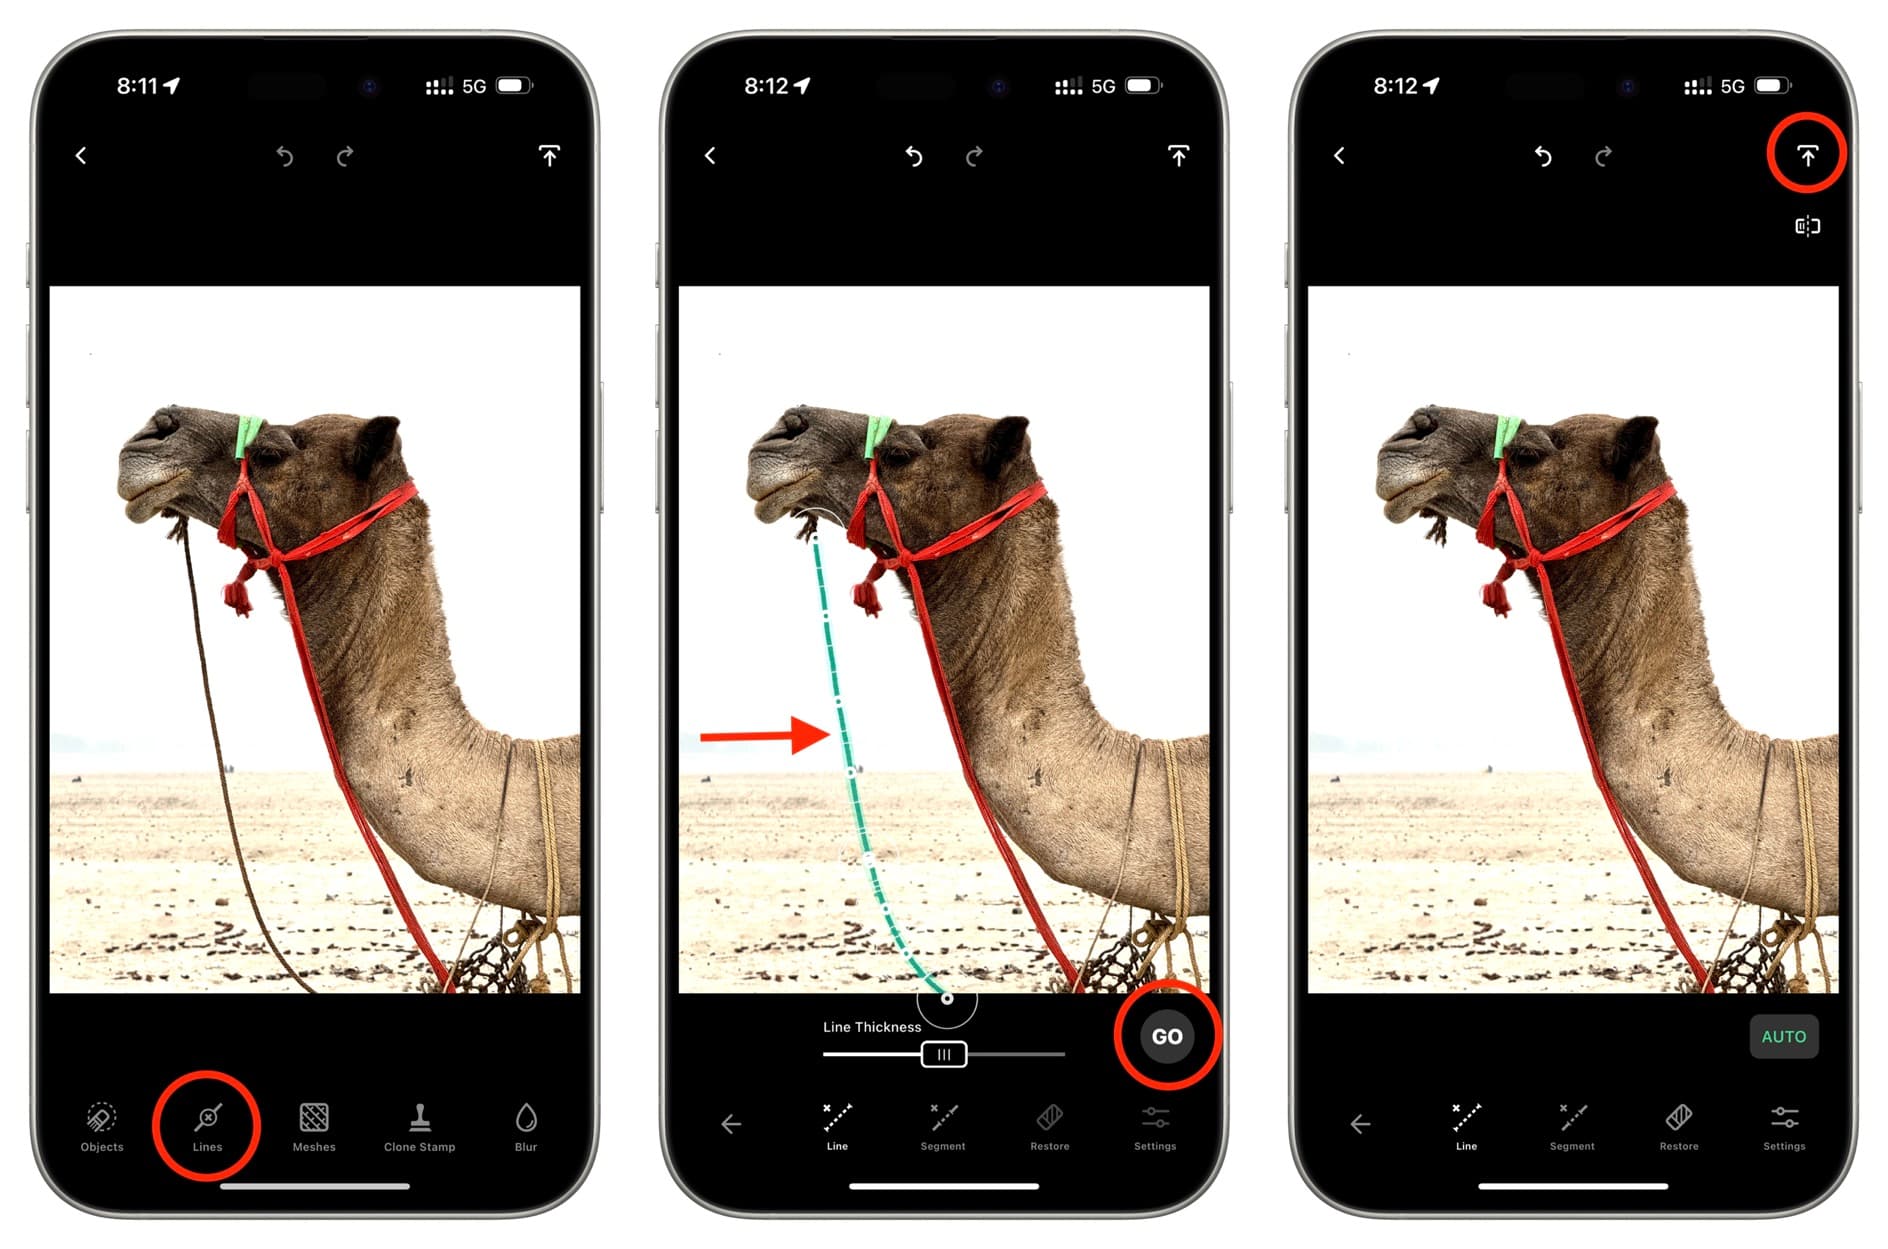 Remove unwanted lines from iPhone photos